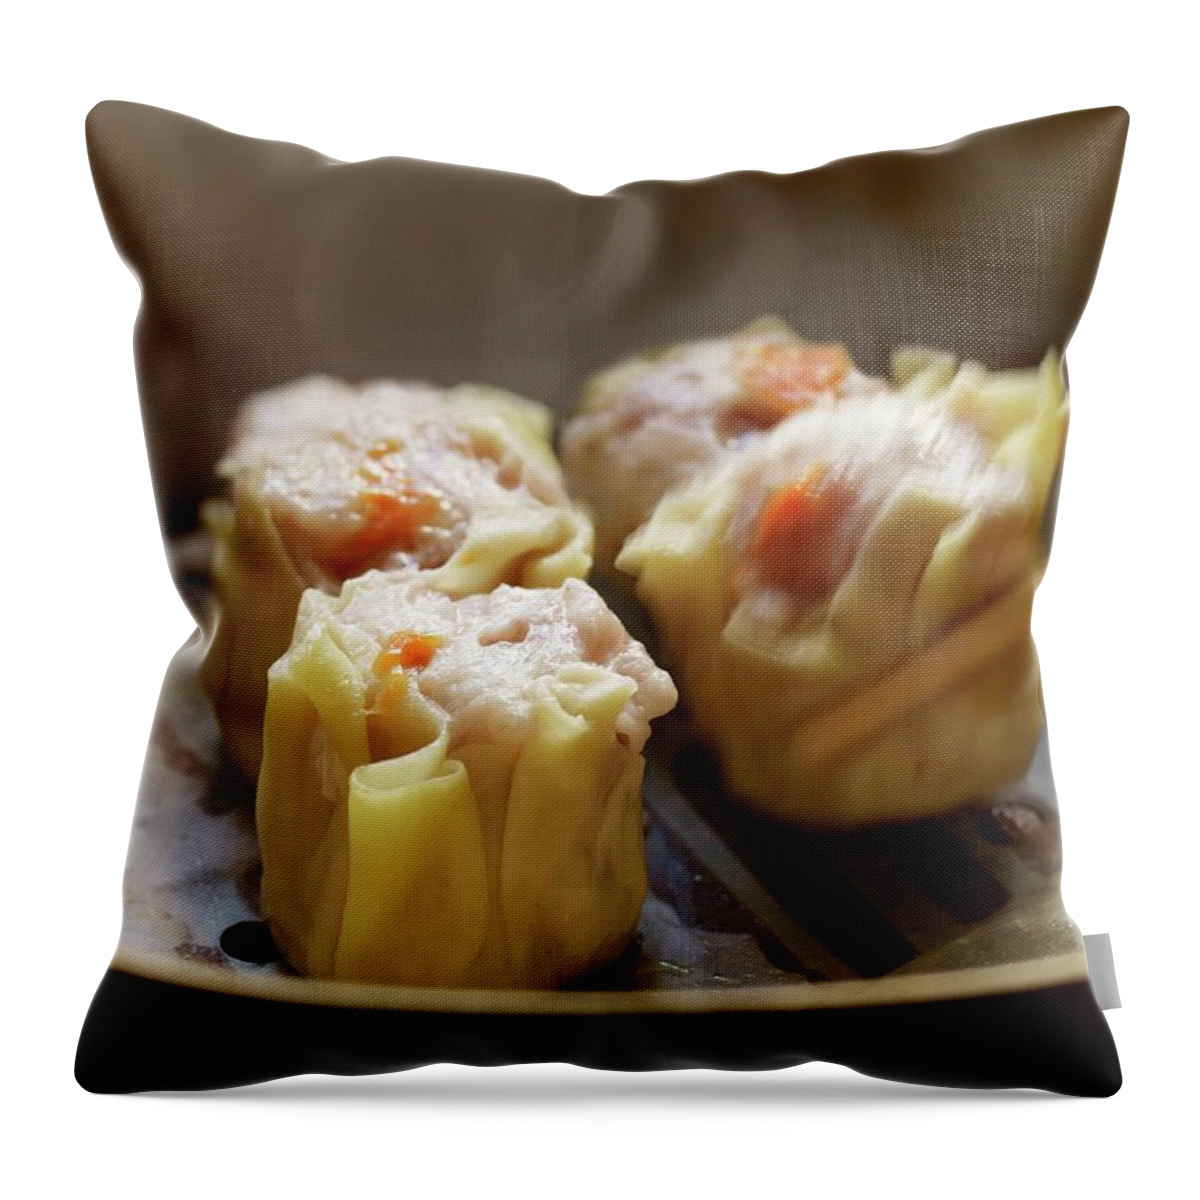 Ip_11307946 Throw Pillow featuring the photograph Siu Mai Dim Sum cantonese Pork And Prawn Dumplings One Being Lifted With Chop Sticks by Atkinson / Sue Dr.